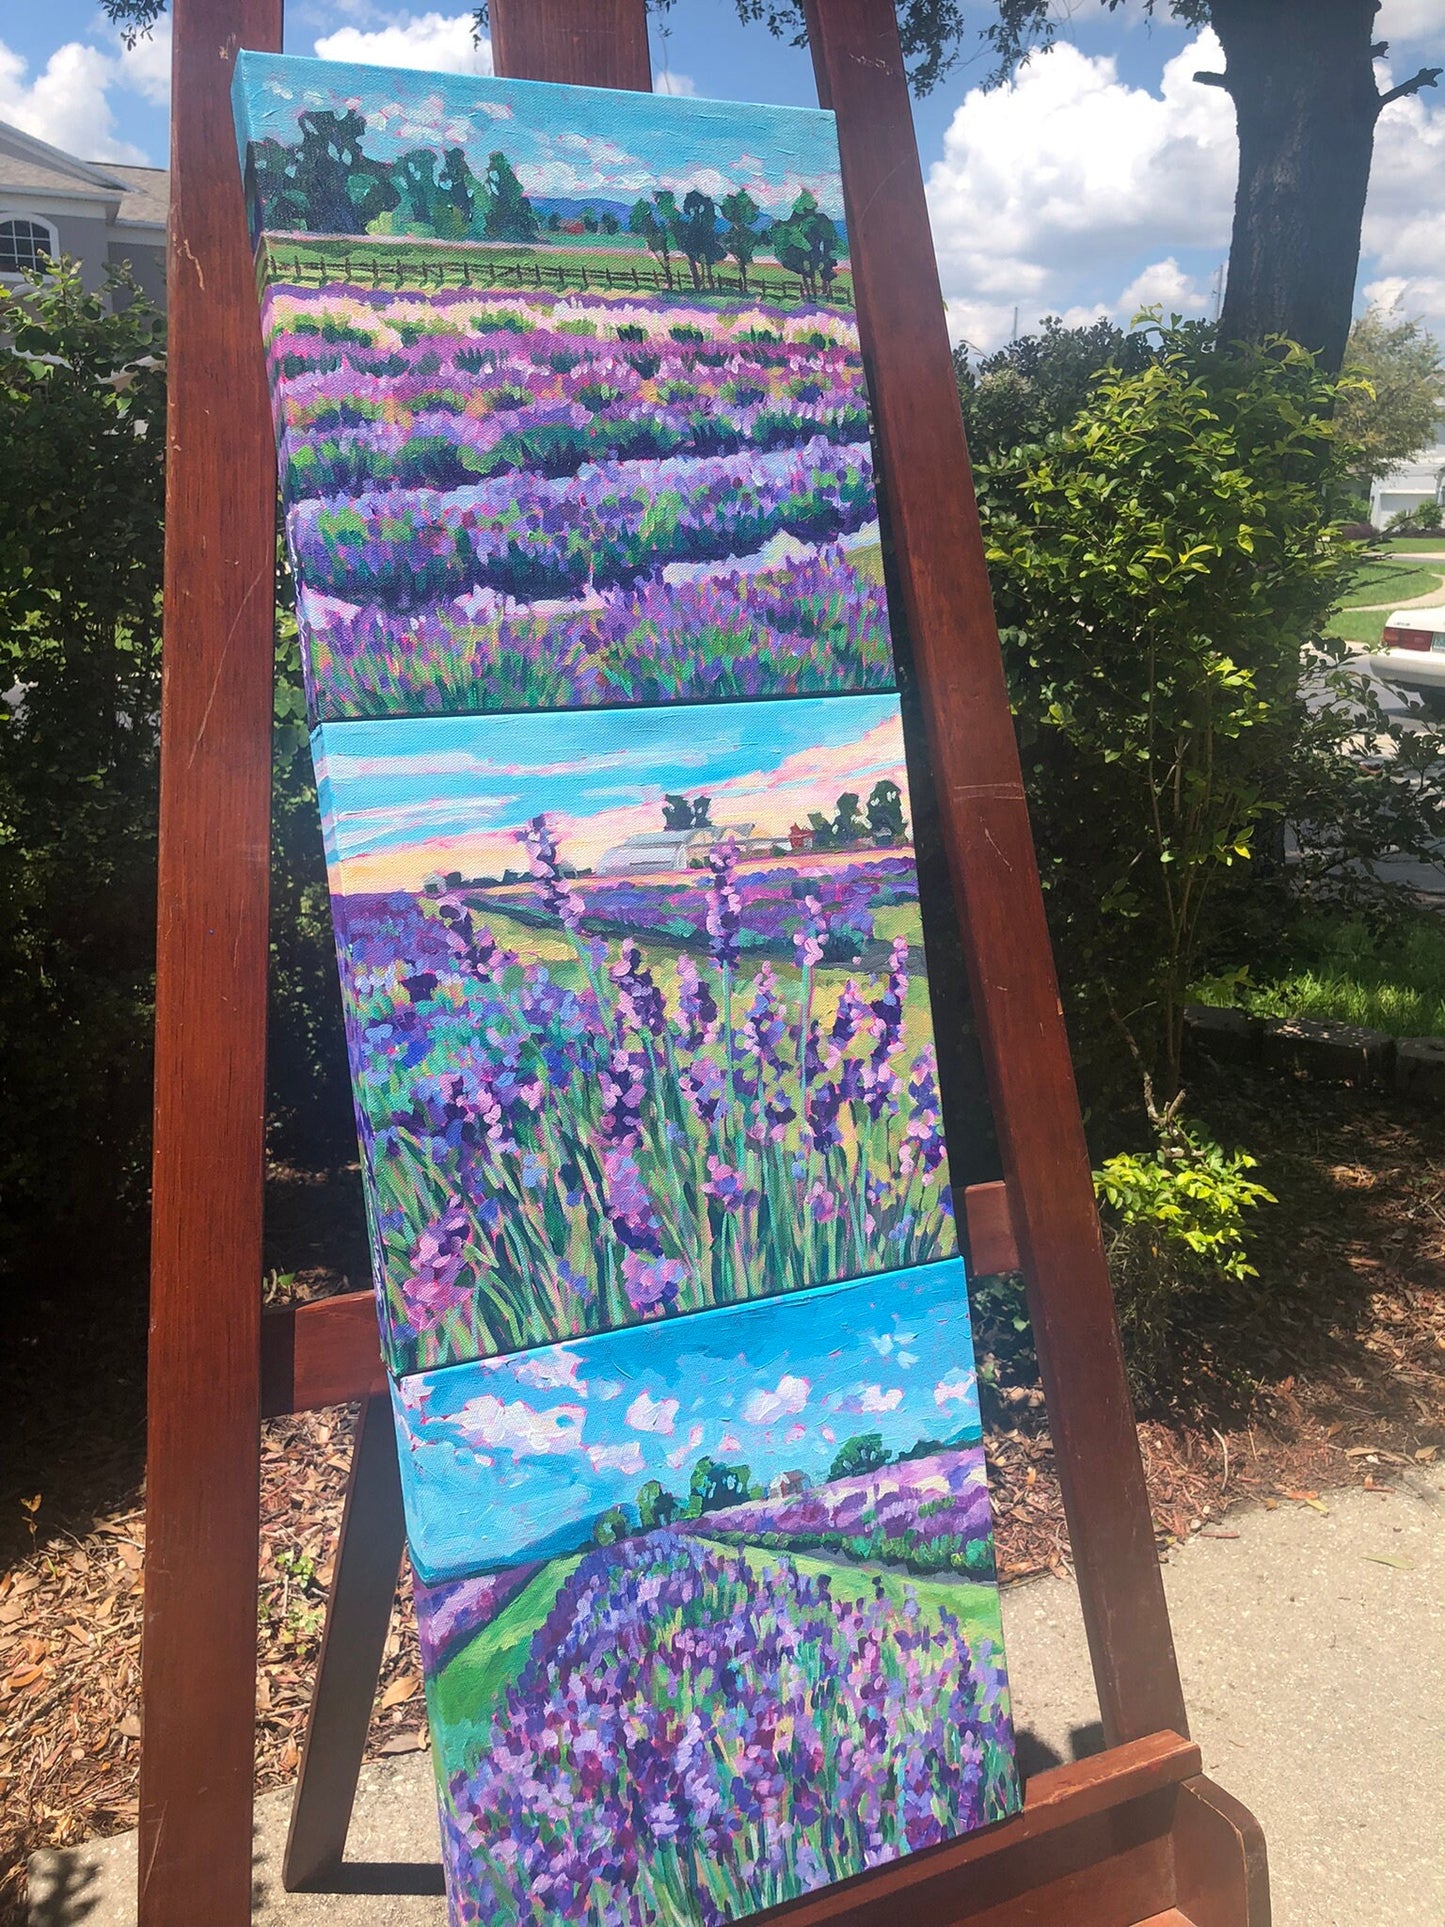 3 lavender field paintings on easel outside